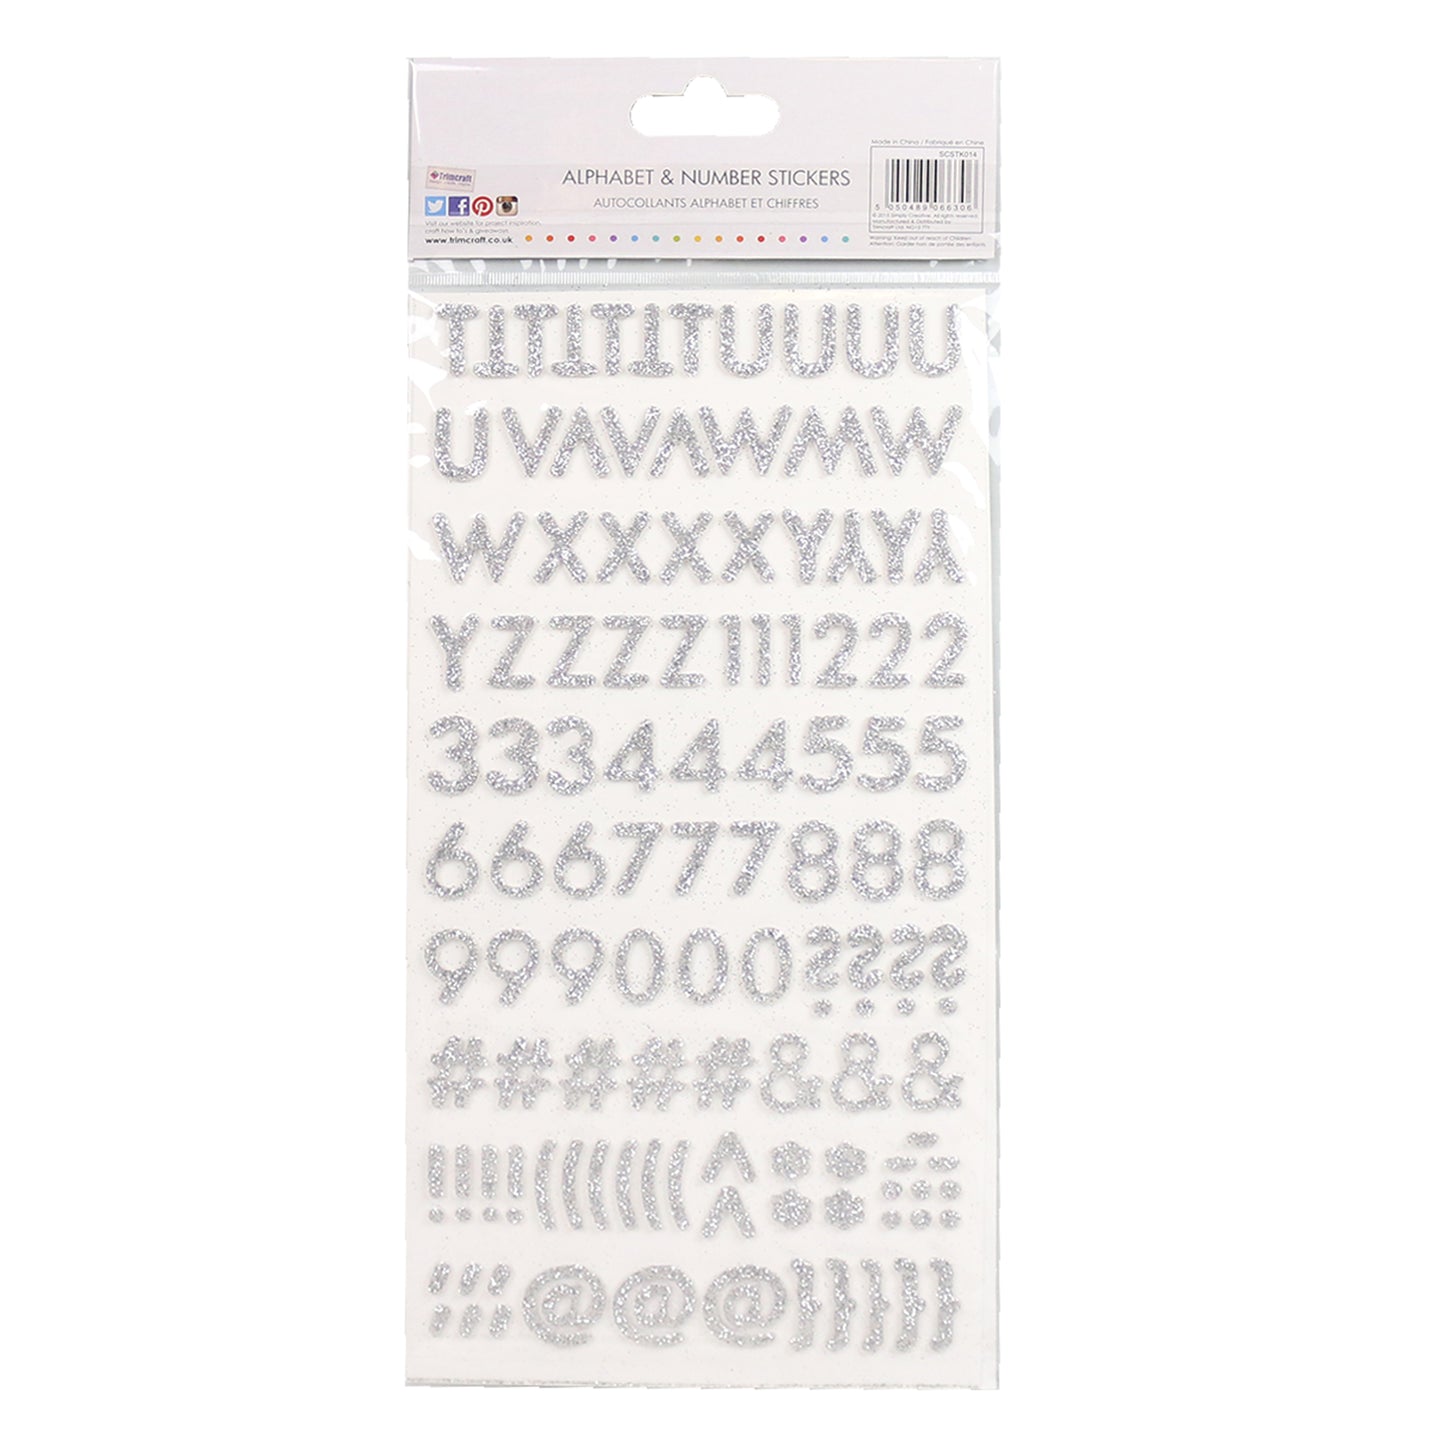 Simply Creative Alphabet & Number Stickers - Skinny Glitter Silver